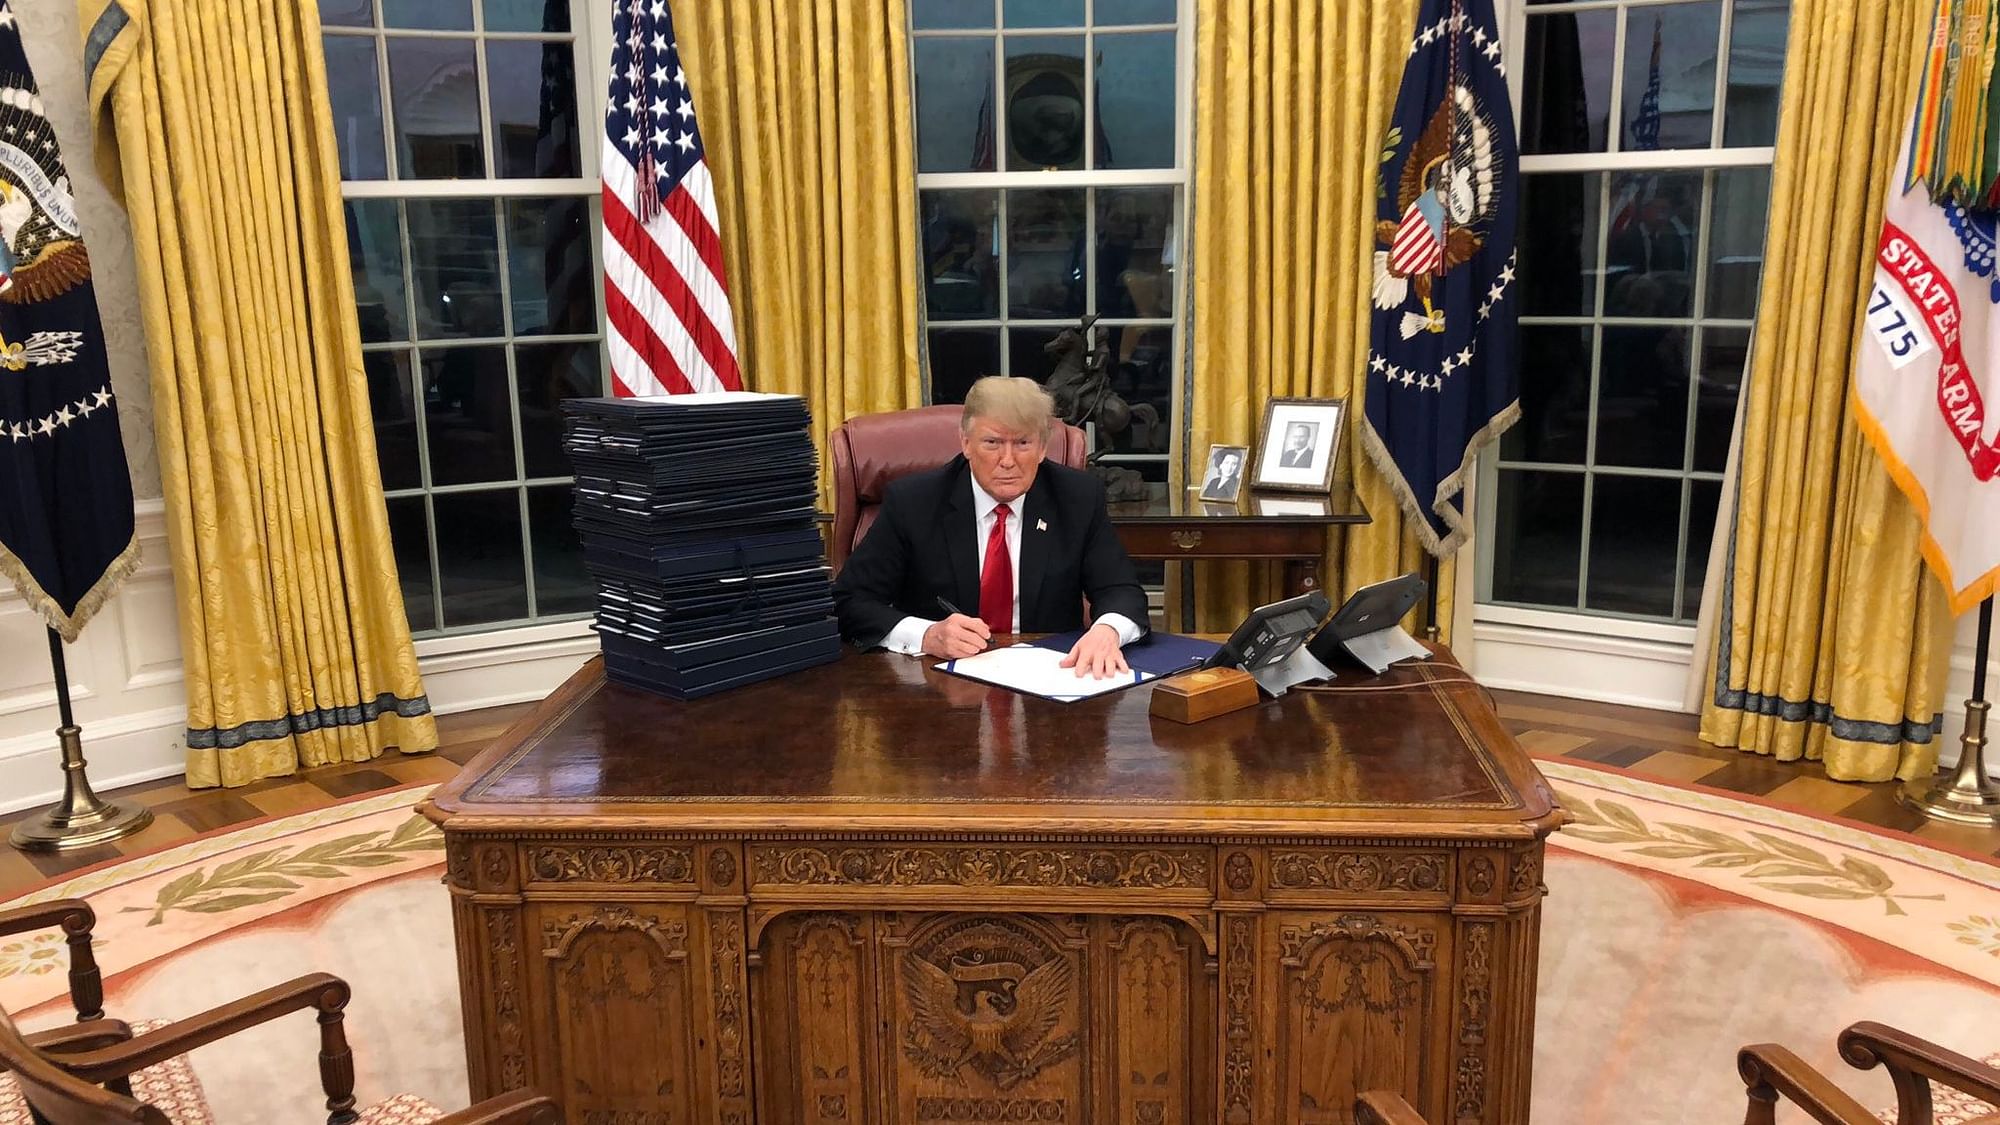 US President Donald Trump at the Oval Office. He warned Turkey of economic consequences if it hits the Kurds.